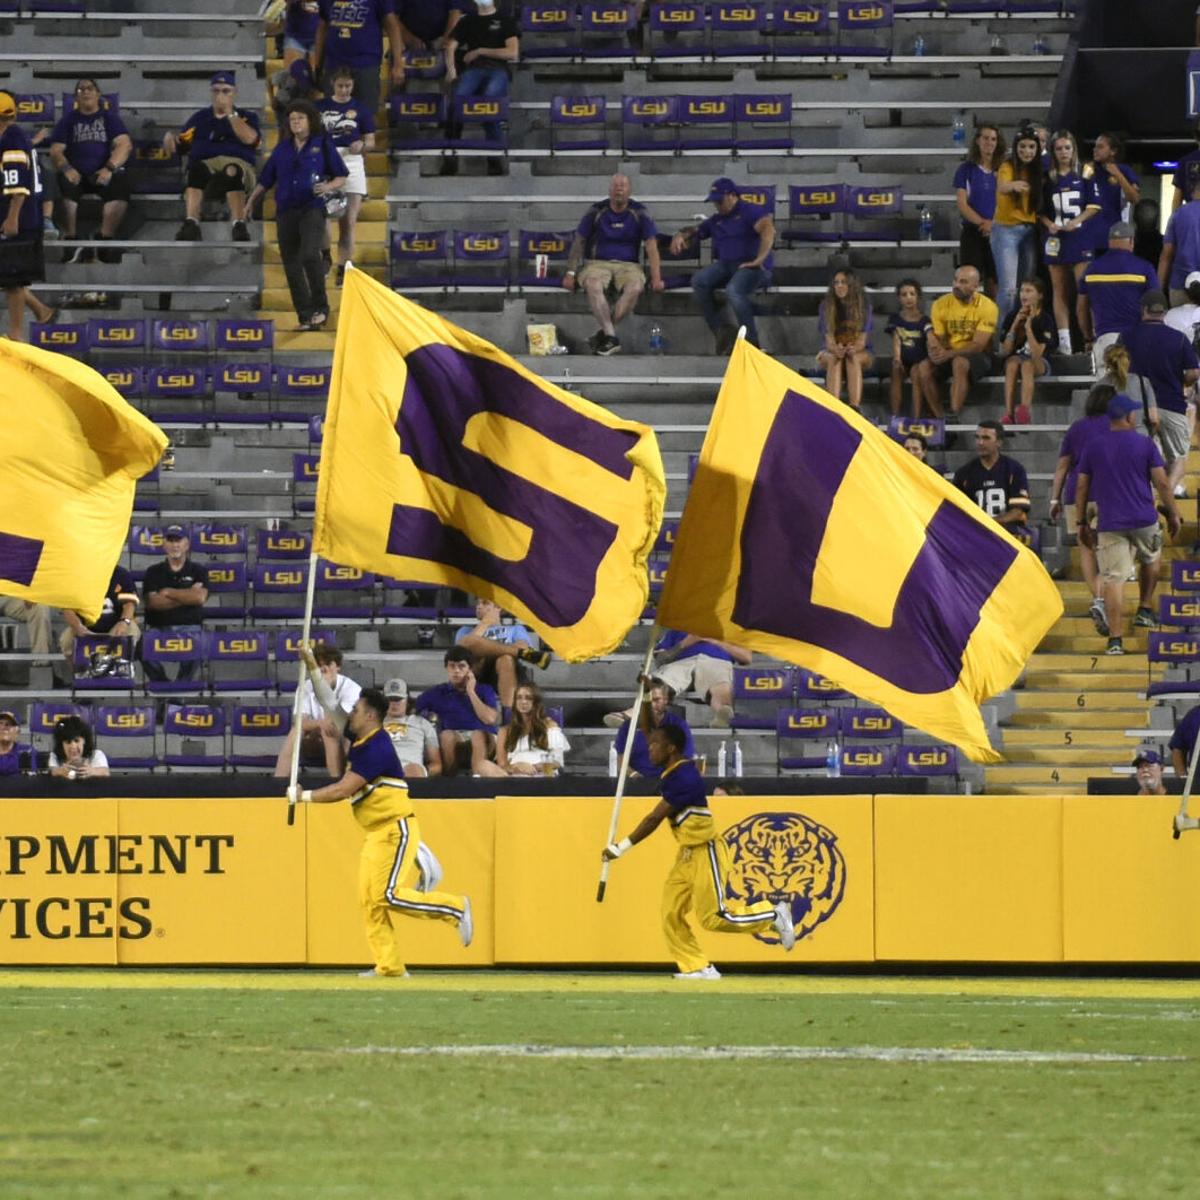 Lsu Schedule 2022 Football Ready For 2022? Lsu Football Schedule Released; See The Tigers' Key Dates,  Opponents | Lsu | Theadvocate.com